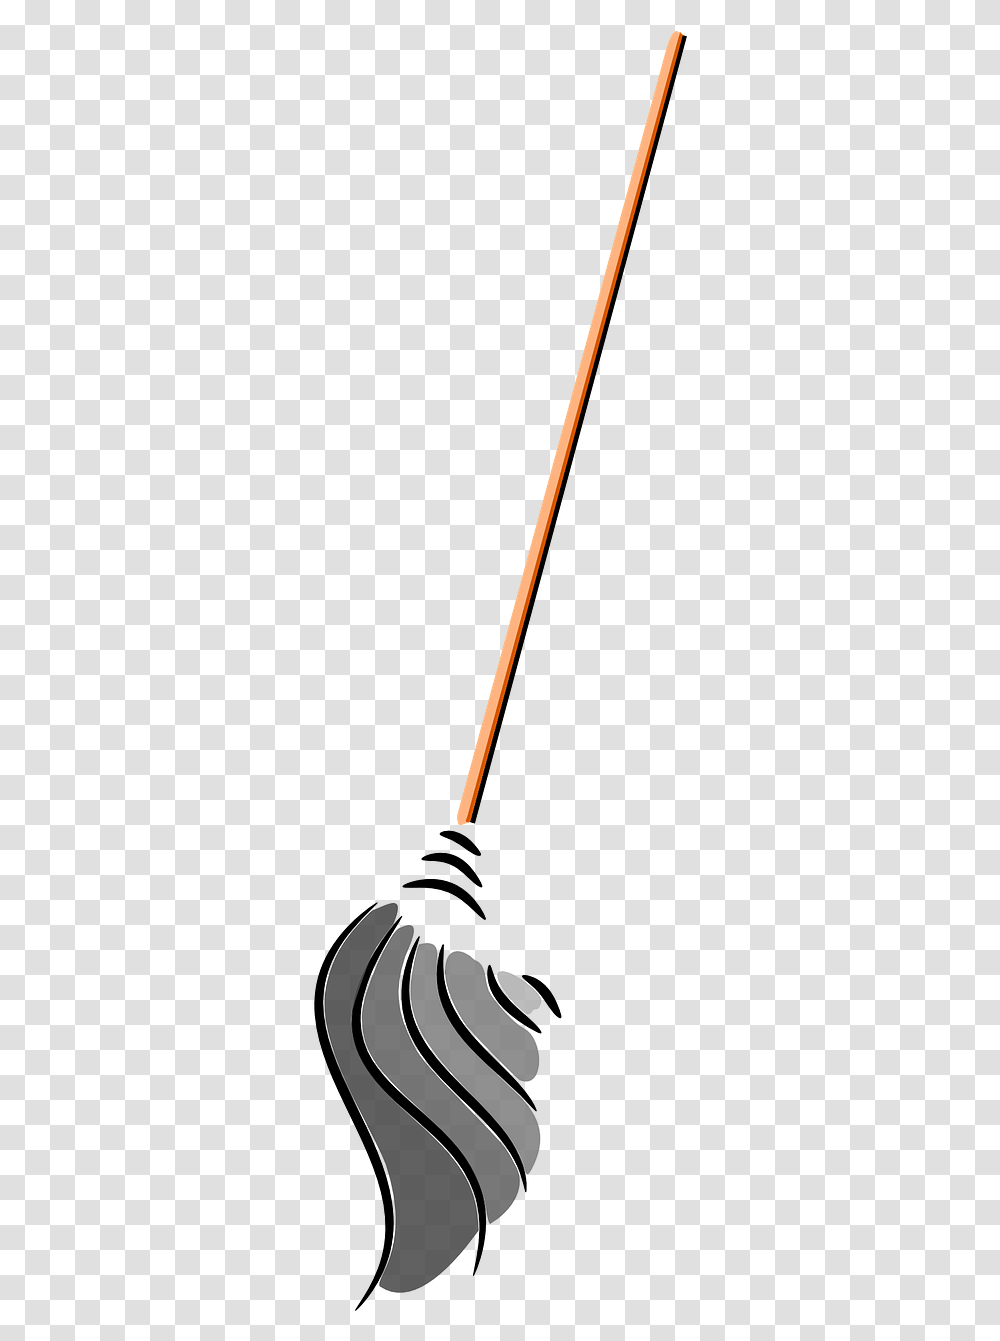 Mop Vector, Arrow, Weapon, Weaponry Transparent Png